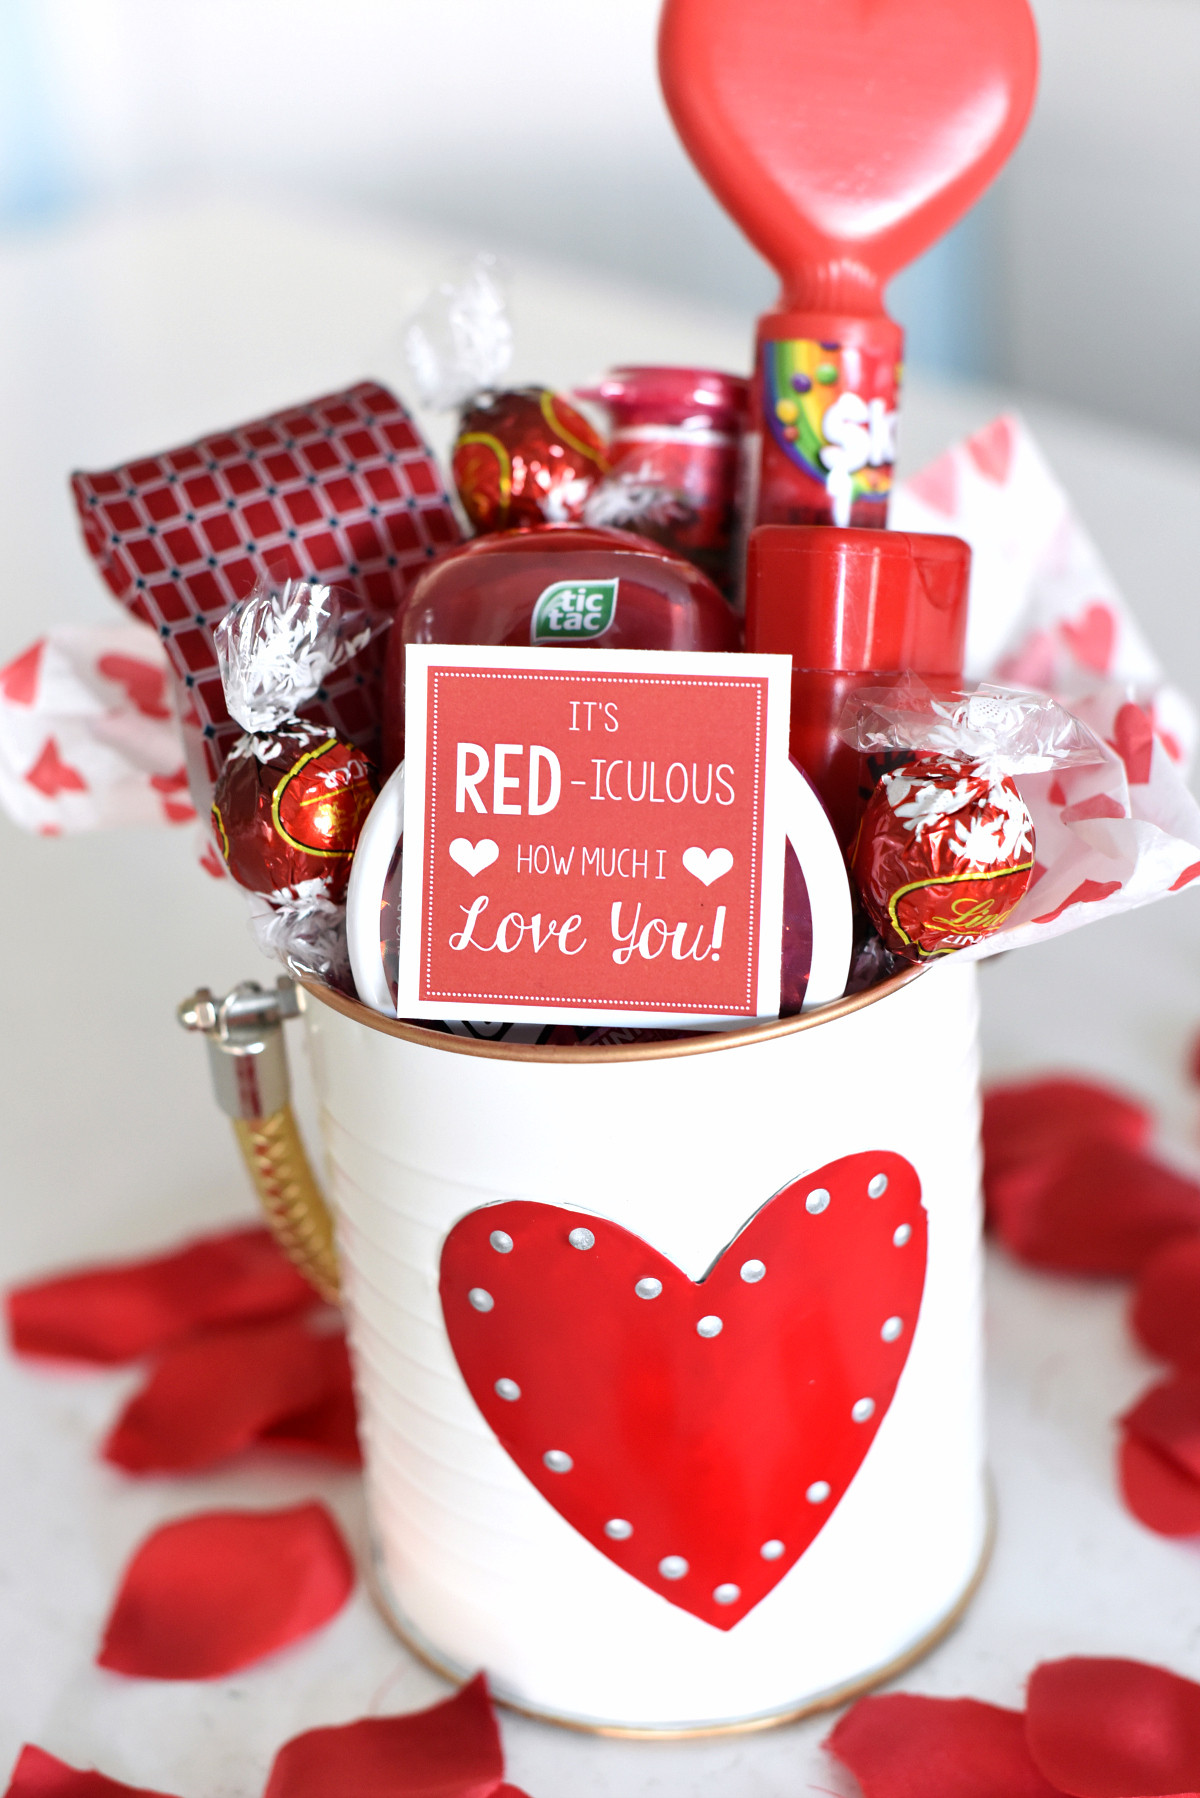 Unique Valentines Day Gifts
 Cute Valentine s Day Gift Idea RED iculous Basket